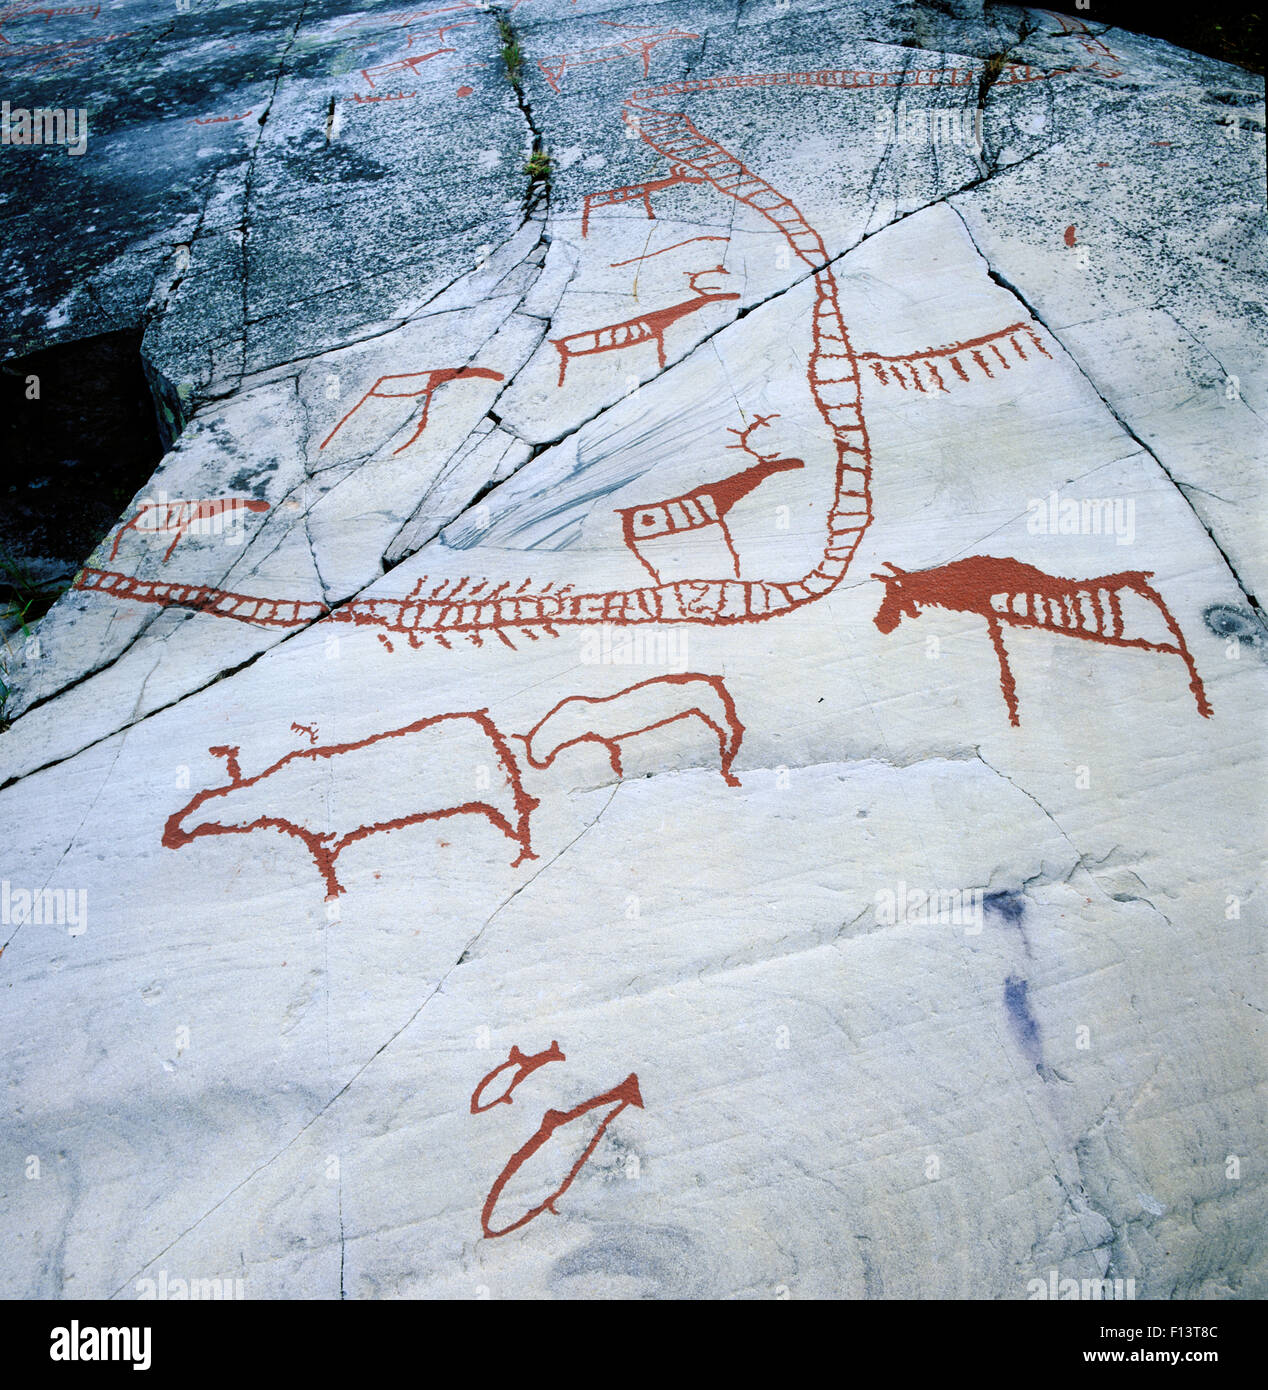 6000-7000 years old stone-age rock carvings, Hjemmeluft UNESCO World Heritage site, Alta, Finnmark,  Norway. Stock Photo